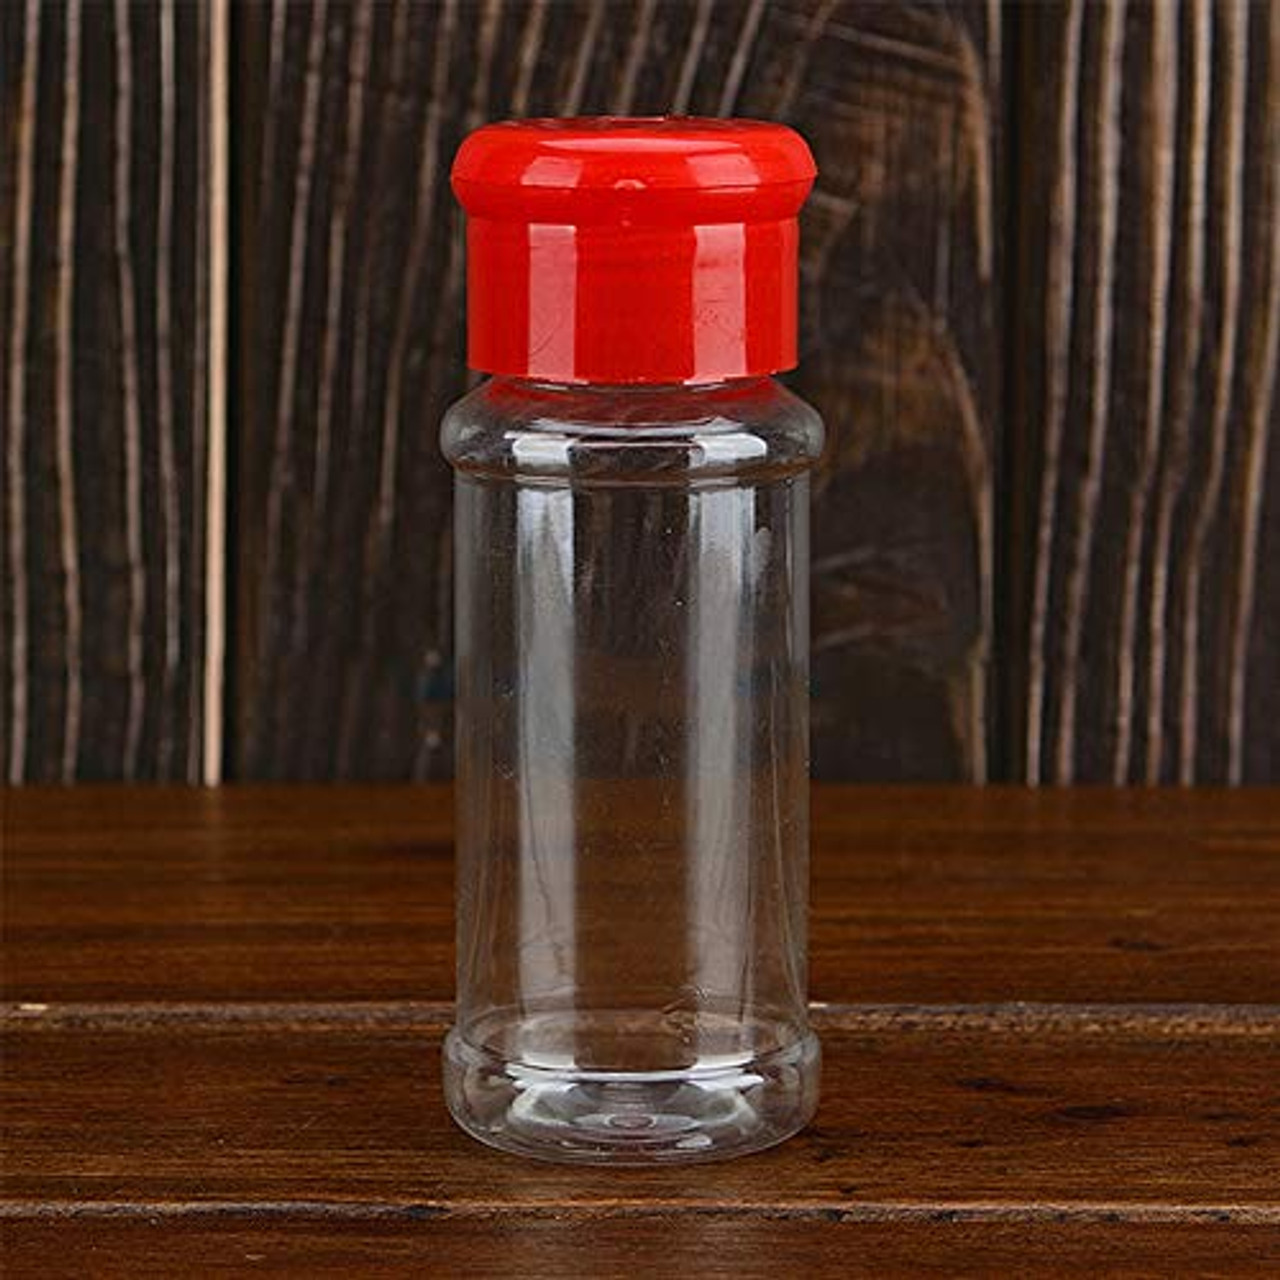 Set of 28 Pcs Empty Plastic Spice Bottles for Storing Barbecue